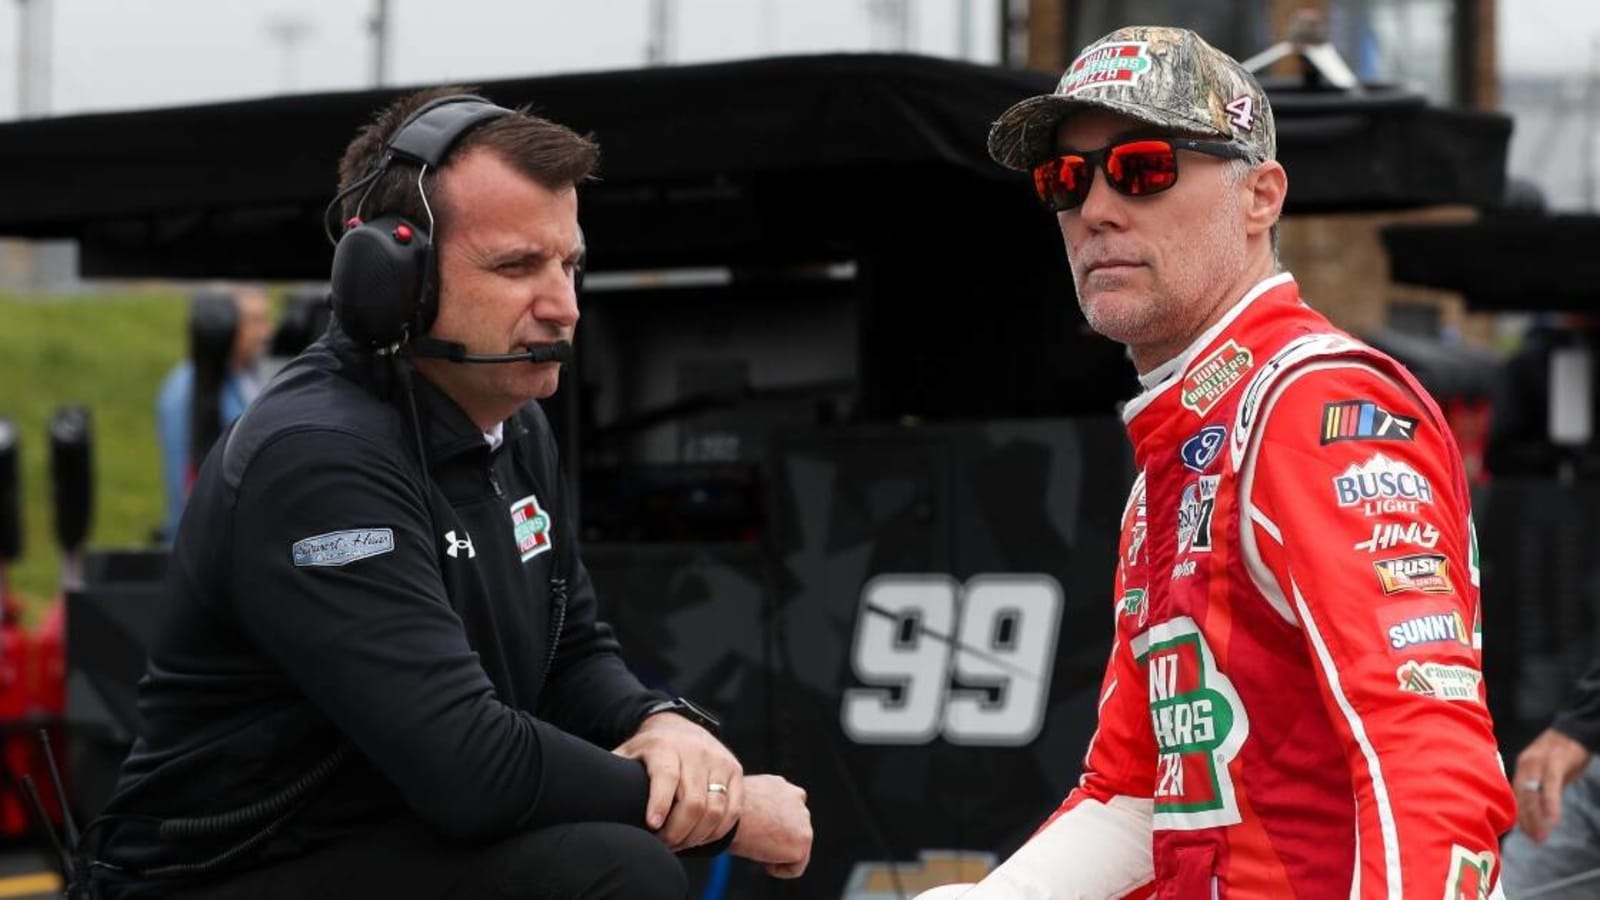 Kevin Harvick crew chief Rodney Childers explains why he won’t attend Watkins Glen race Sunday